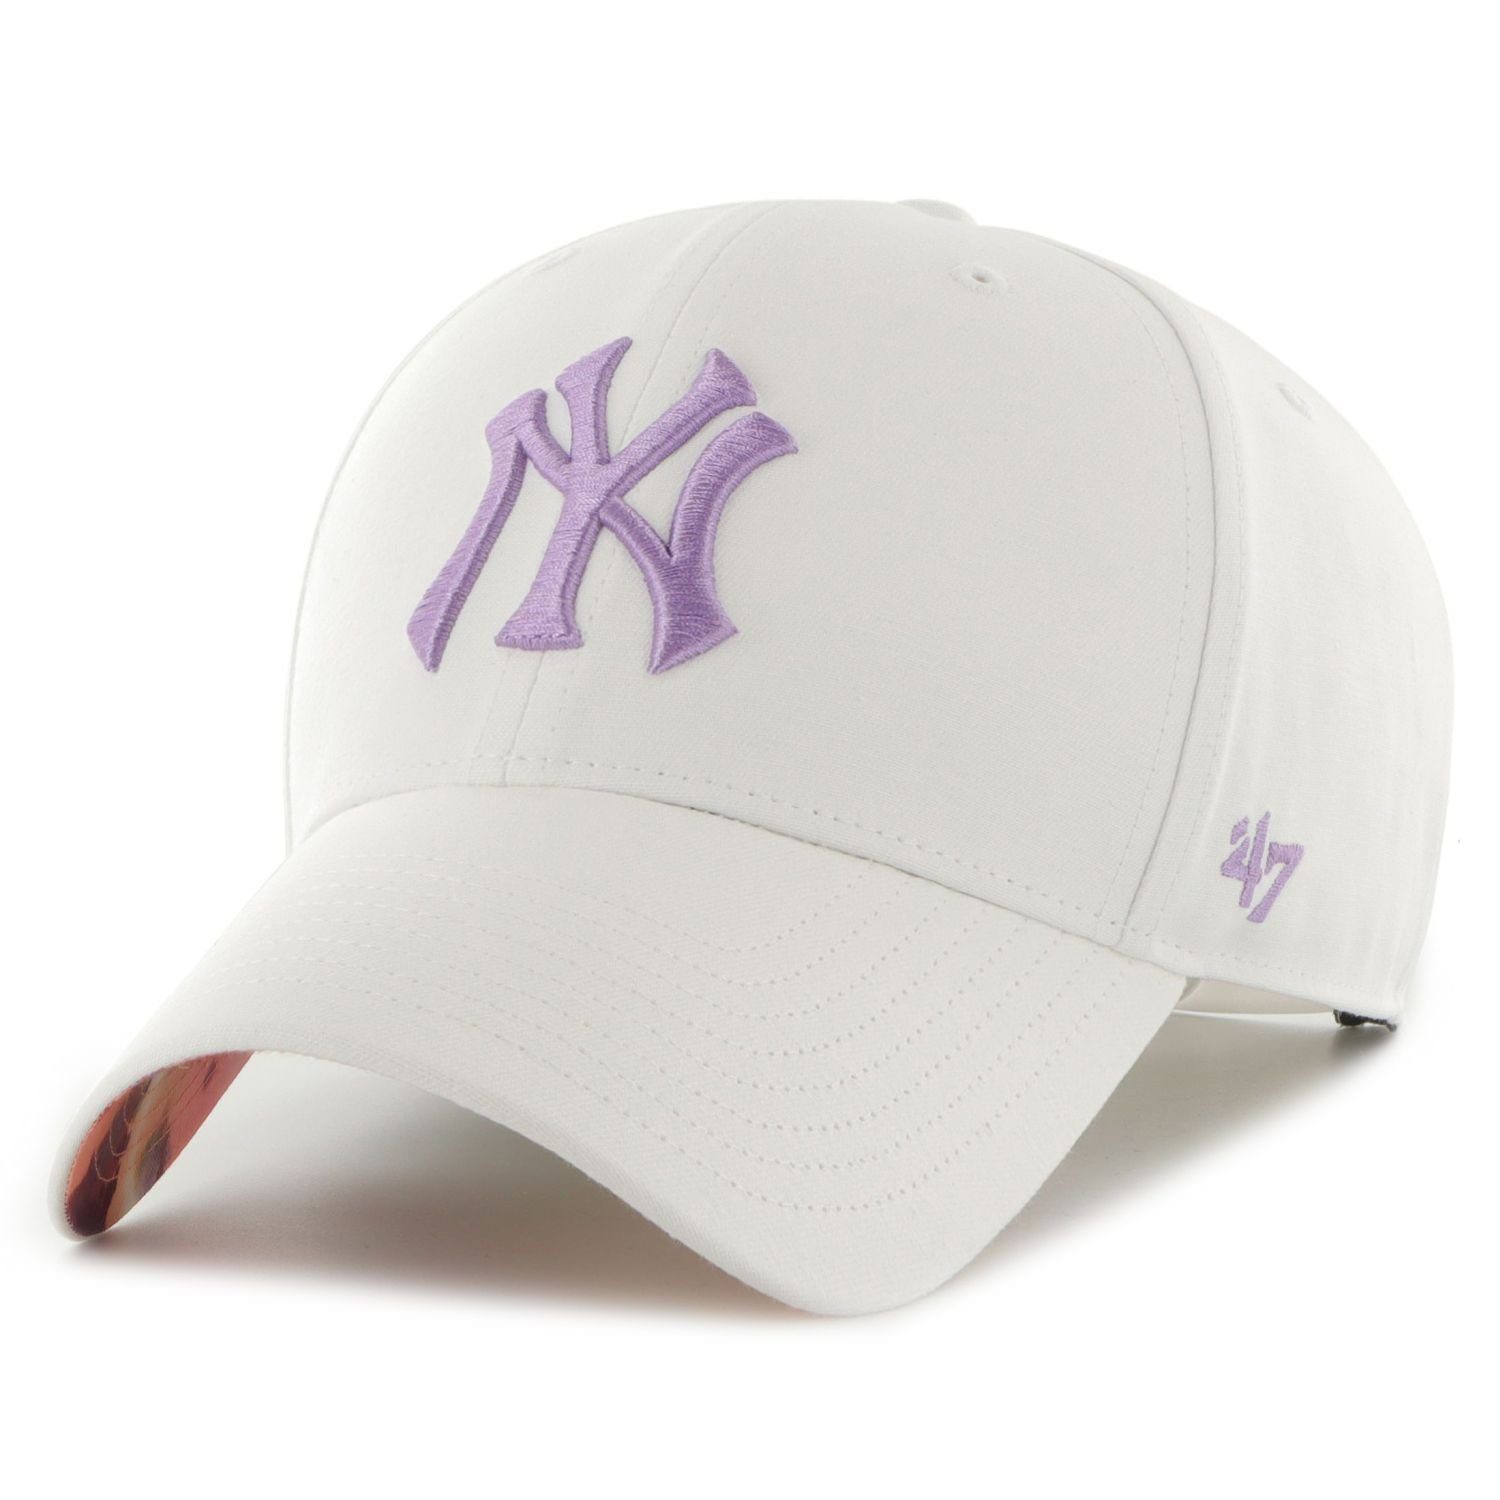 Relaxed DAY Brand GLOW Cap Yankees York New Fit '47 Baseball